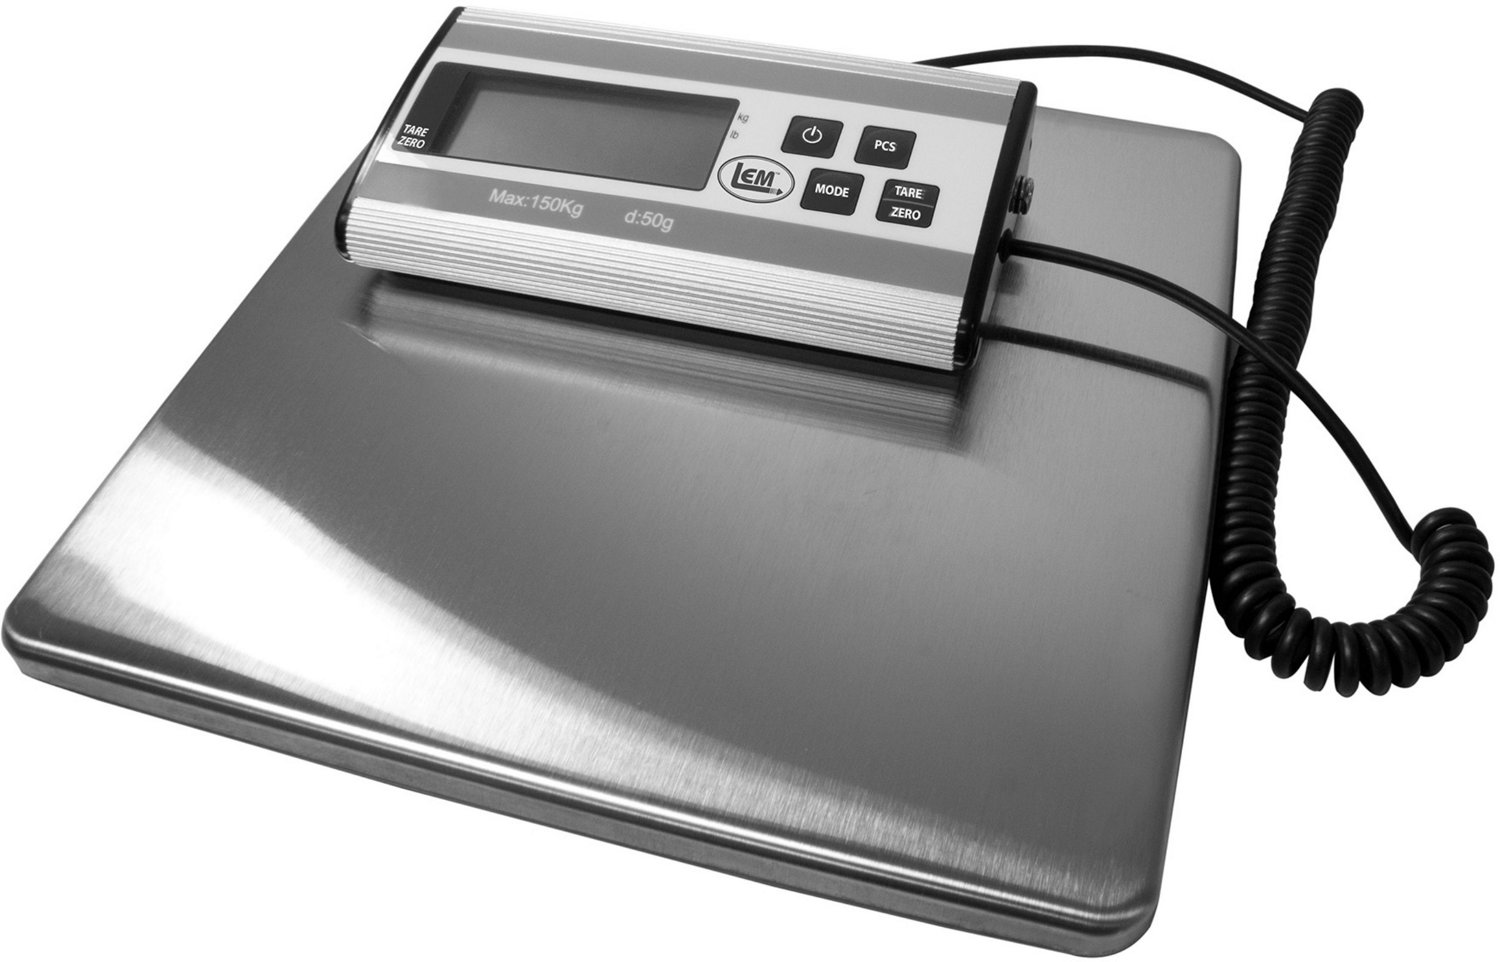 Sportsman Analog Food Scale MS330 - The Home Depot